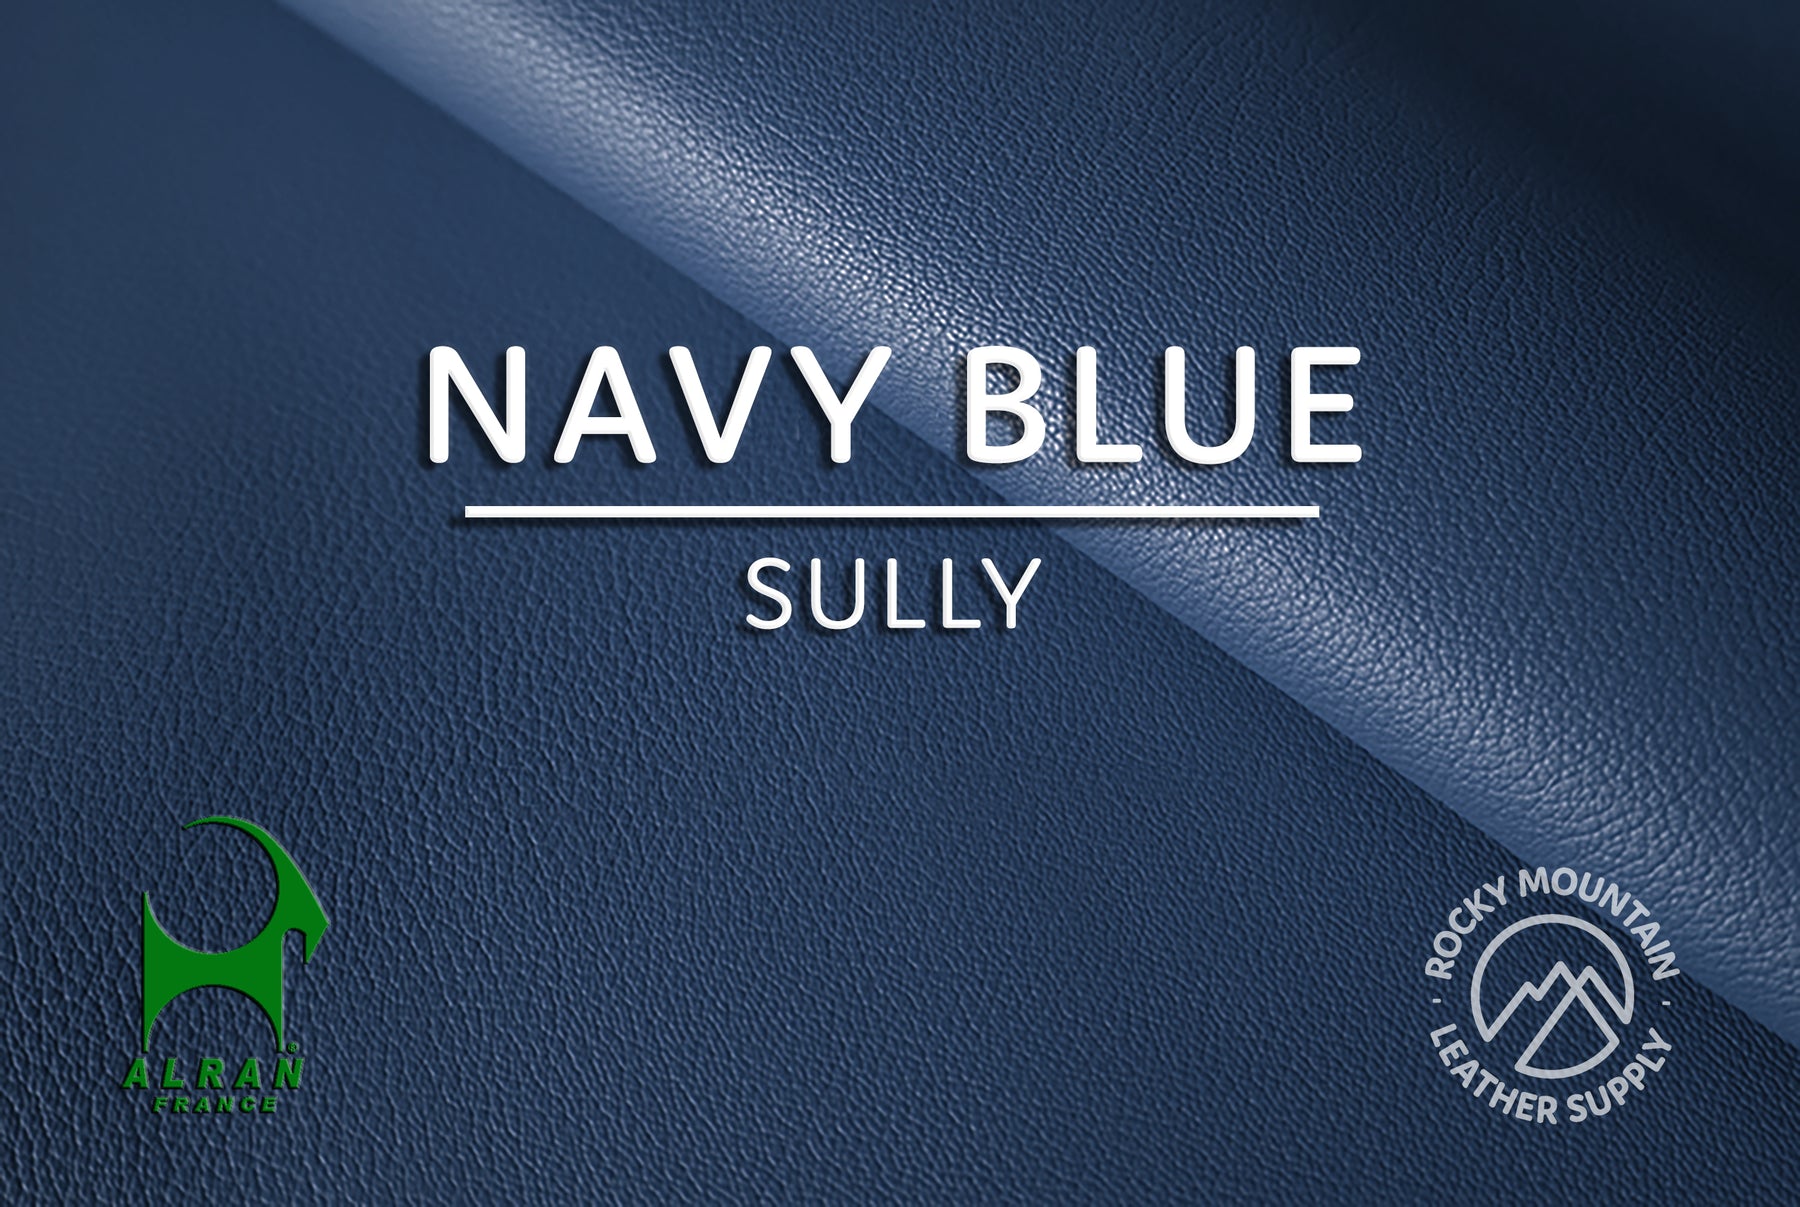 Alran 🇫🇷 - "Sully" Chevre Chagrin - Goat Leather (Blues)